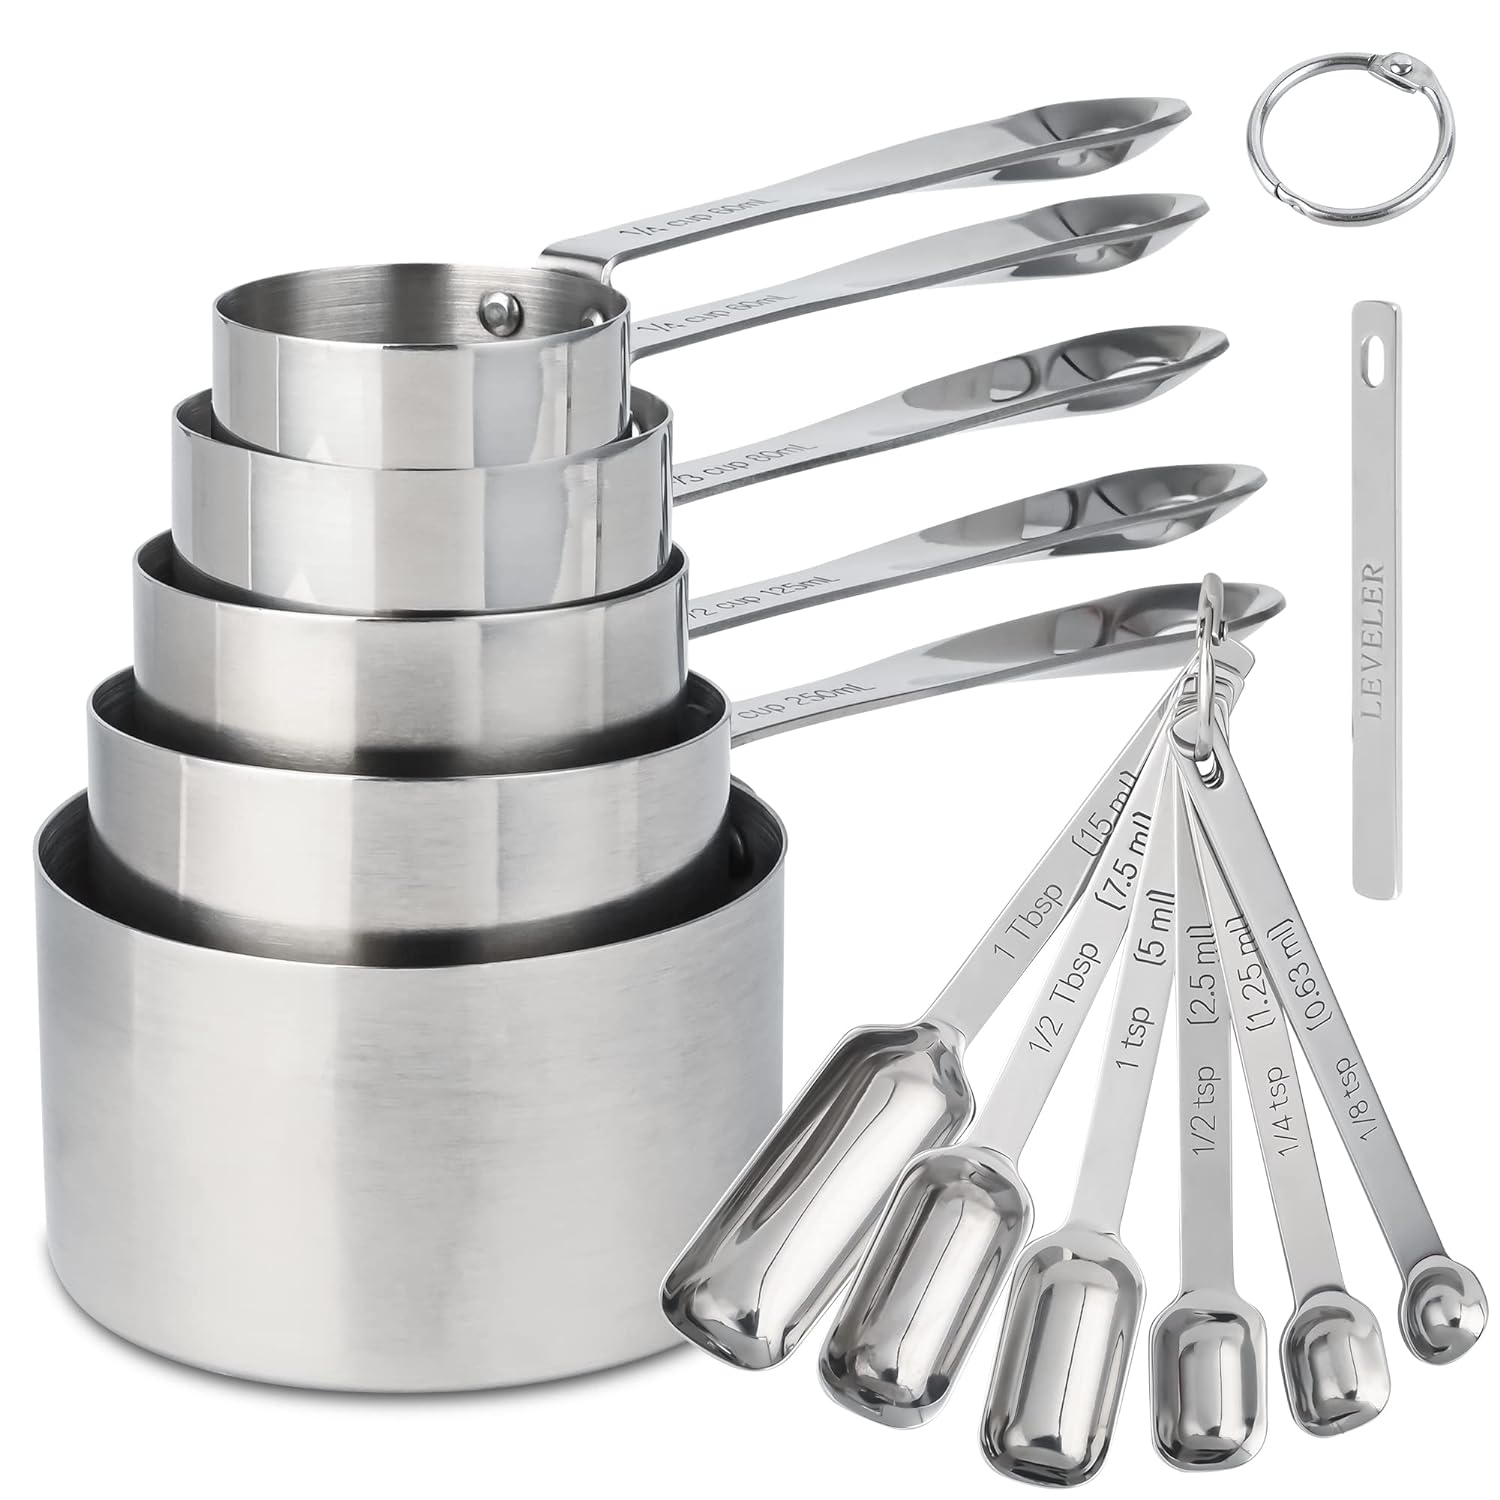 thinkstar Measuring Cups and Spoons Set, 18/8 Stainless Steel Measuring Cups and Spoons Set of 12, Metal Measuring Cups Set, 5 Dry Me